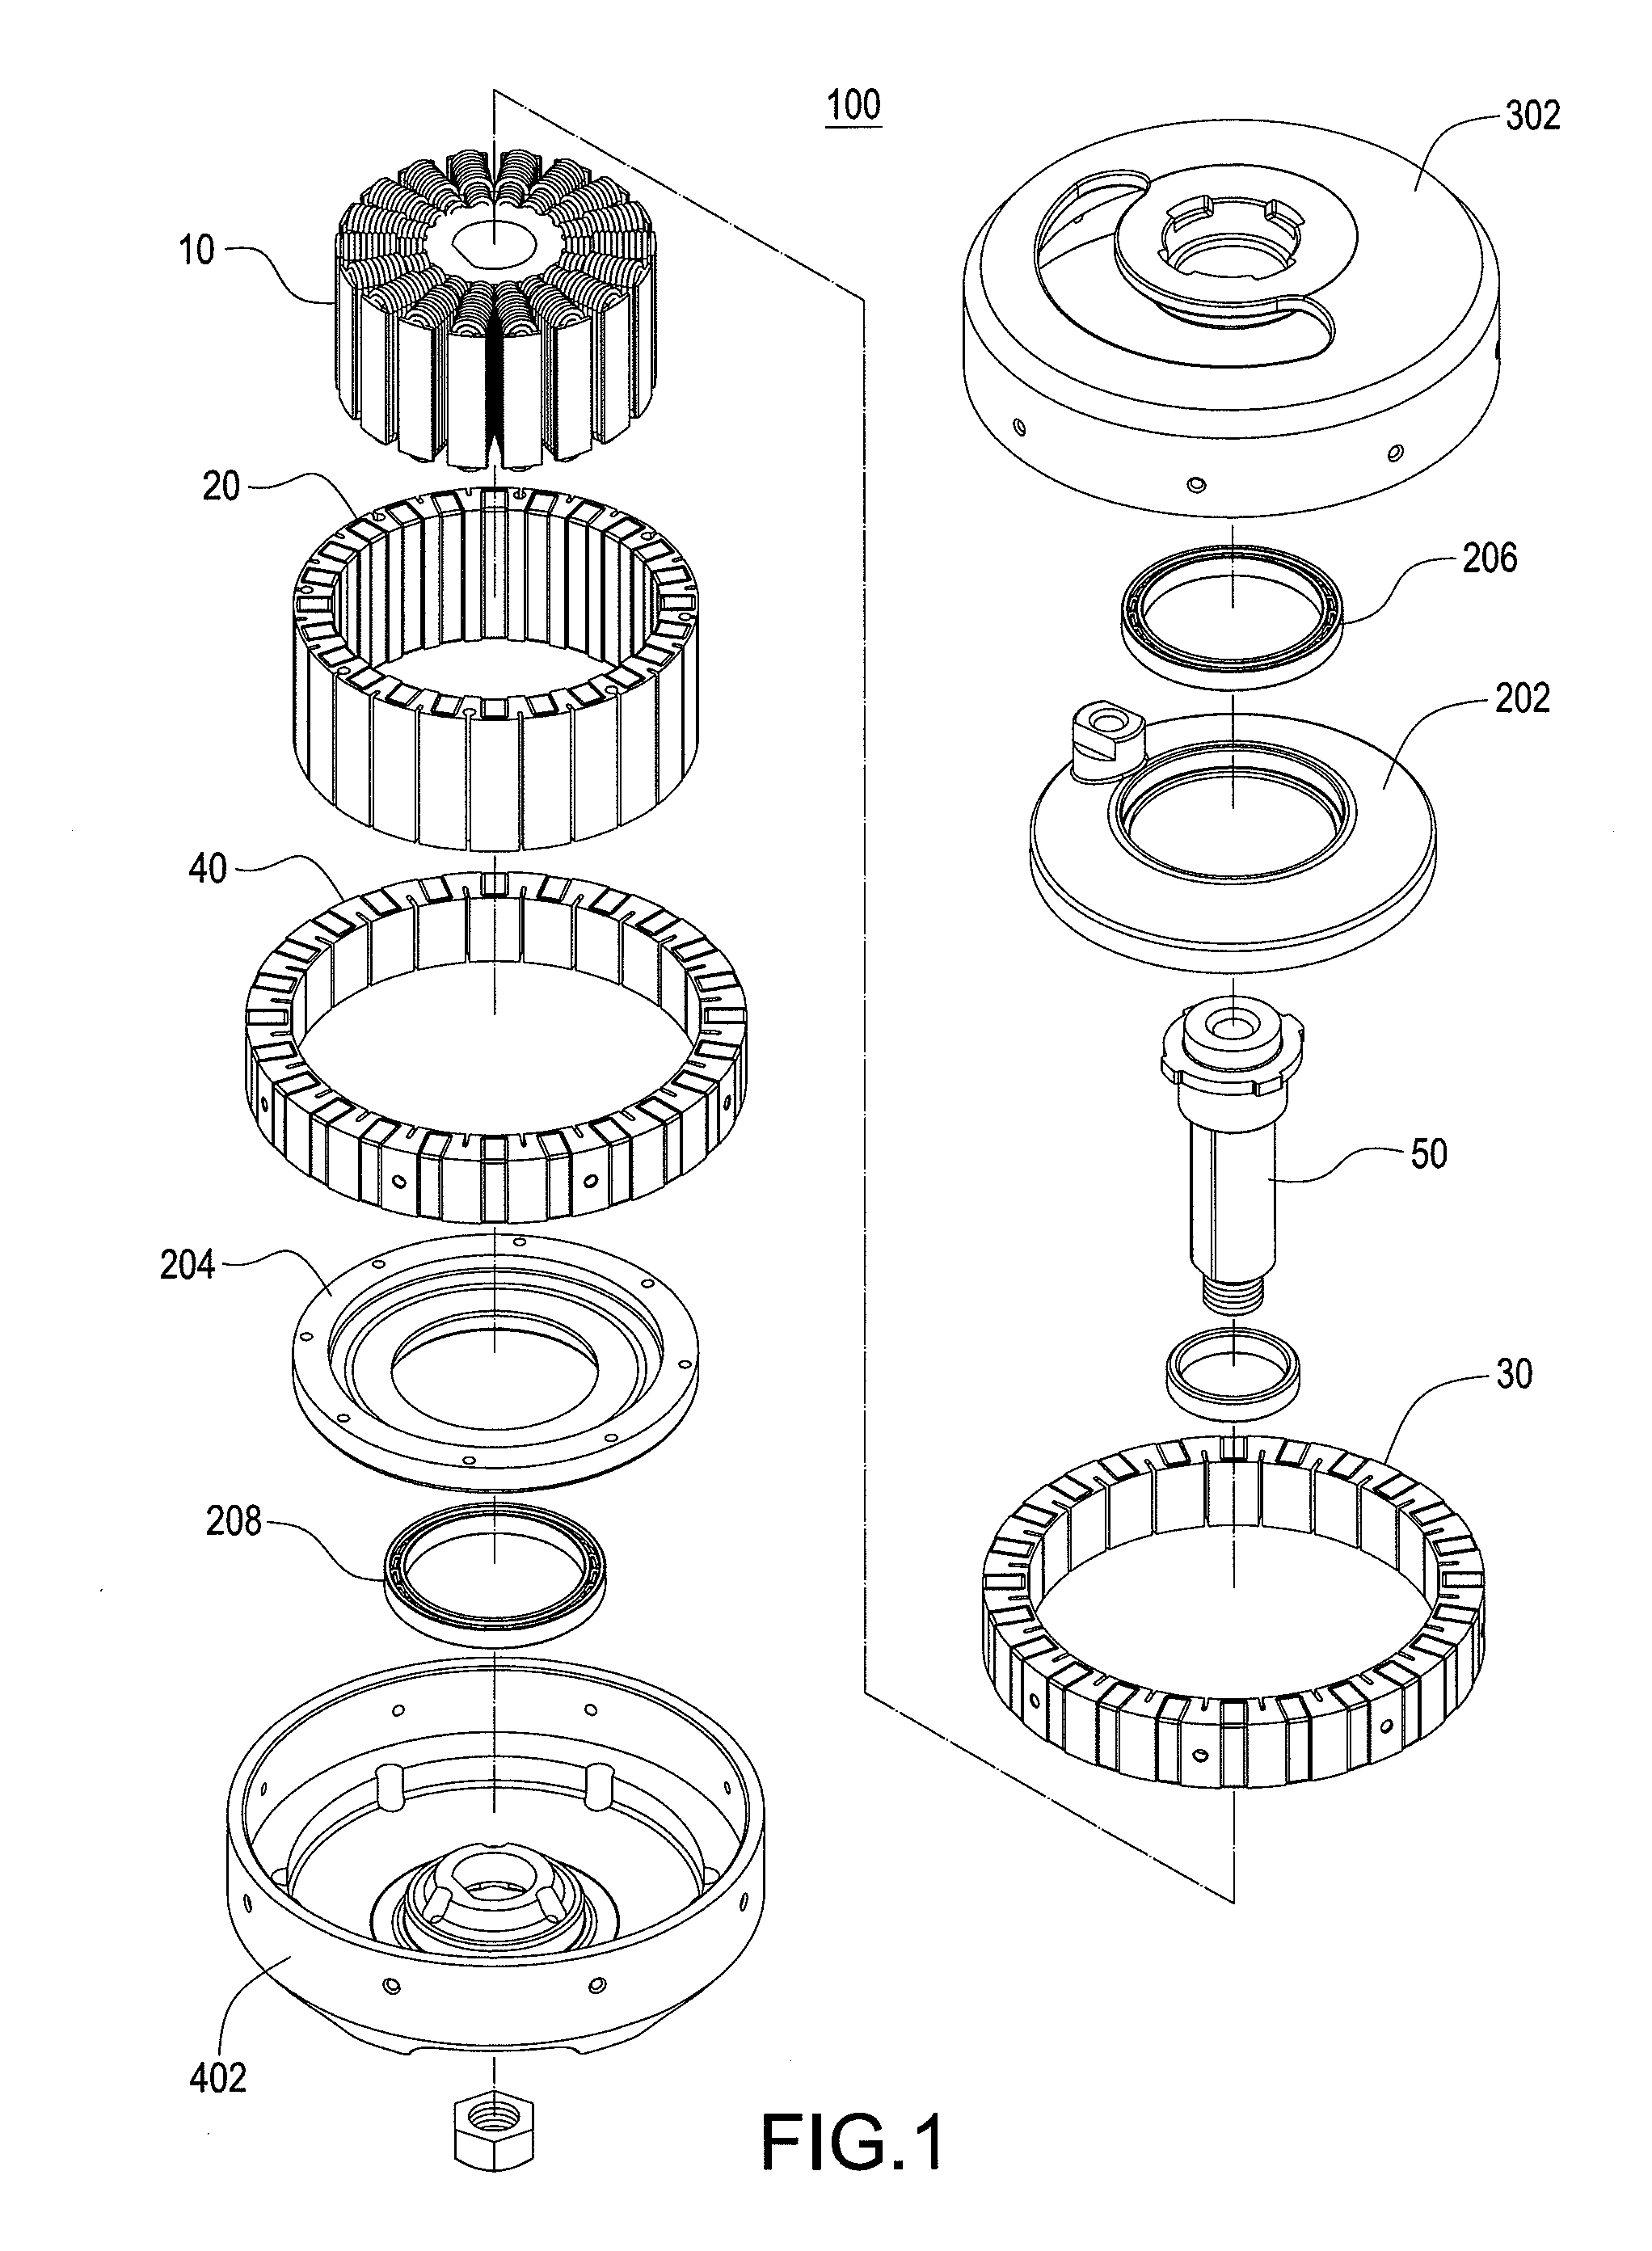 Magnetic-controlled actuator with auto-locking function for joints of manipulation arm